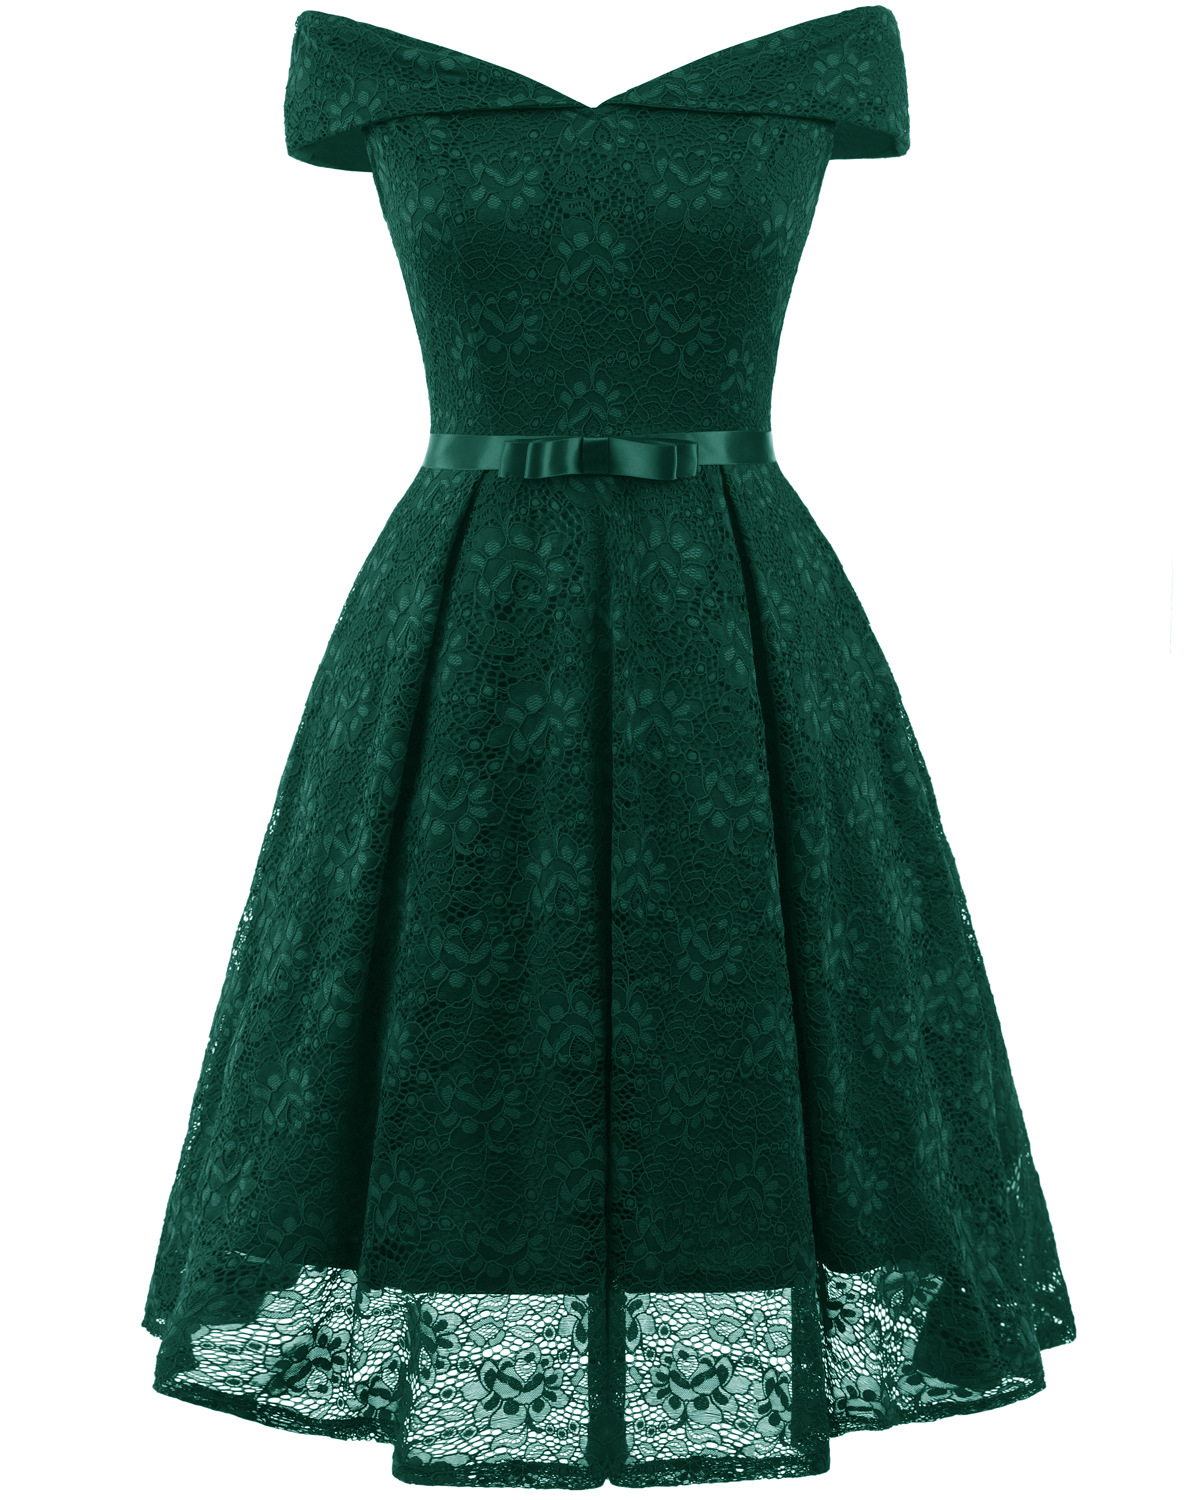 Fashion Green Lace Dress A Line Women Bridesmaid Party Gowns Soft Lace Homecoming Maix Dresses . Mini Party Gowns